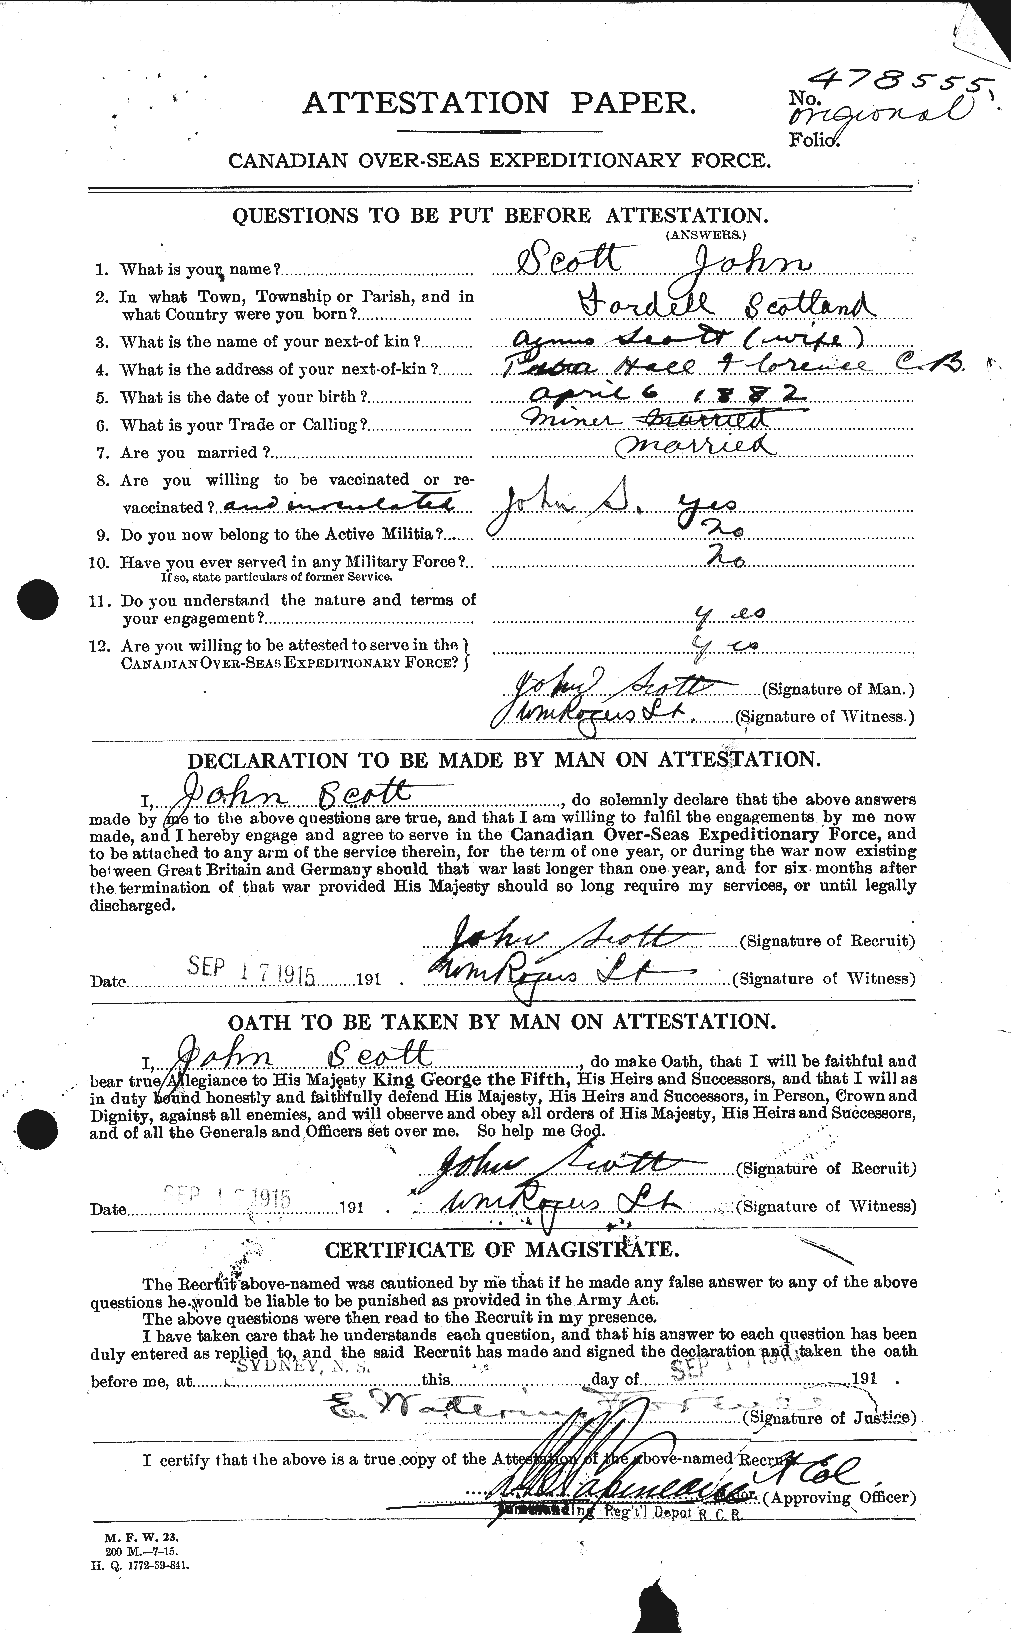 Personnel Records of the First World War - CEF 084917a